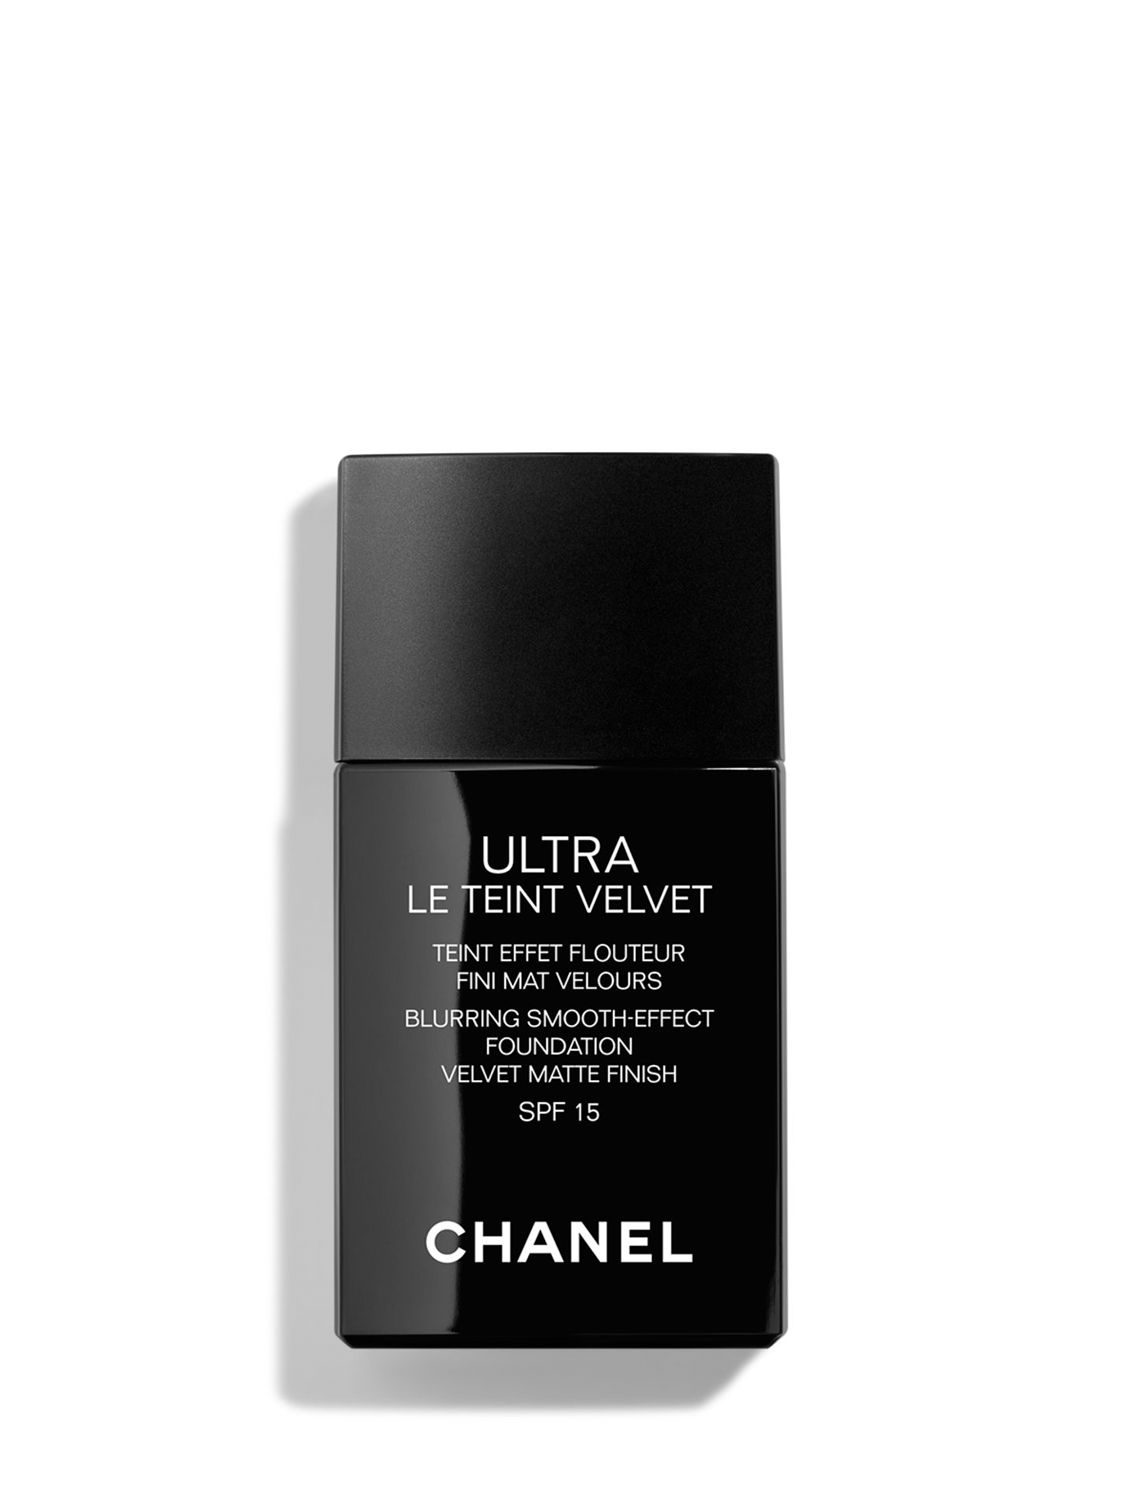 CHANEL Ultra Le Teint Velvet Ultra-Light And Longwearing Formula Blurring Matte Finish Perfect Natural Complexion, 70 Beige 1